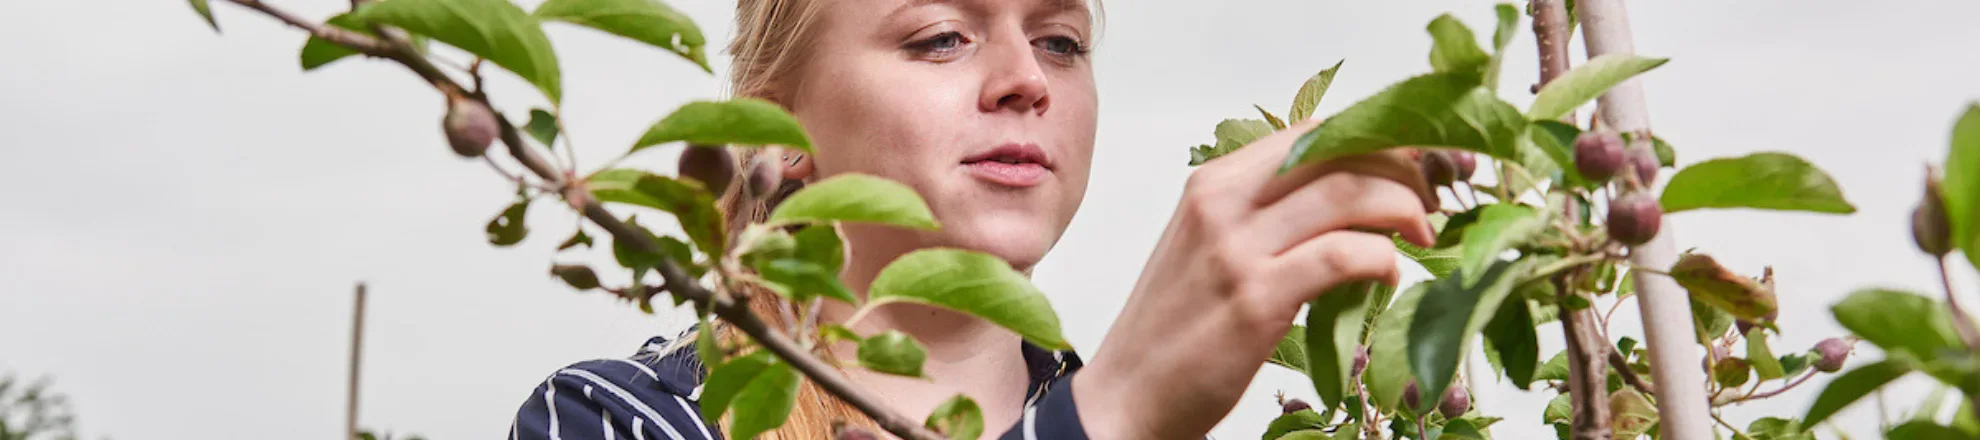 Horticulture student from Aeres University of Applied Sciences in field with tree